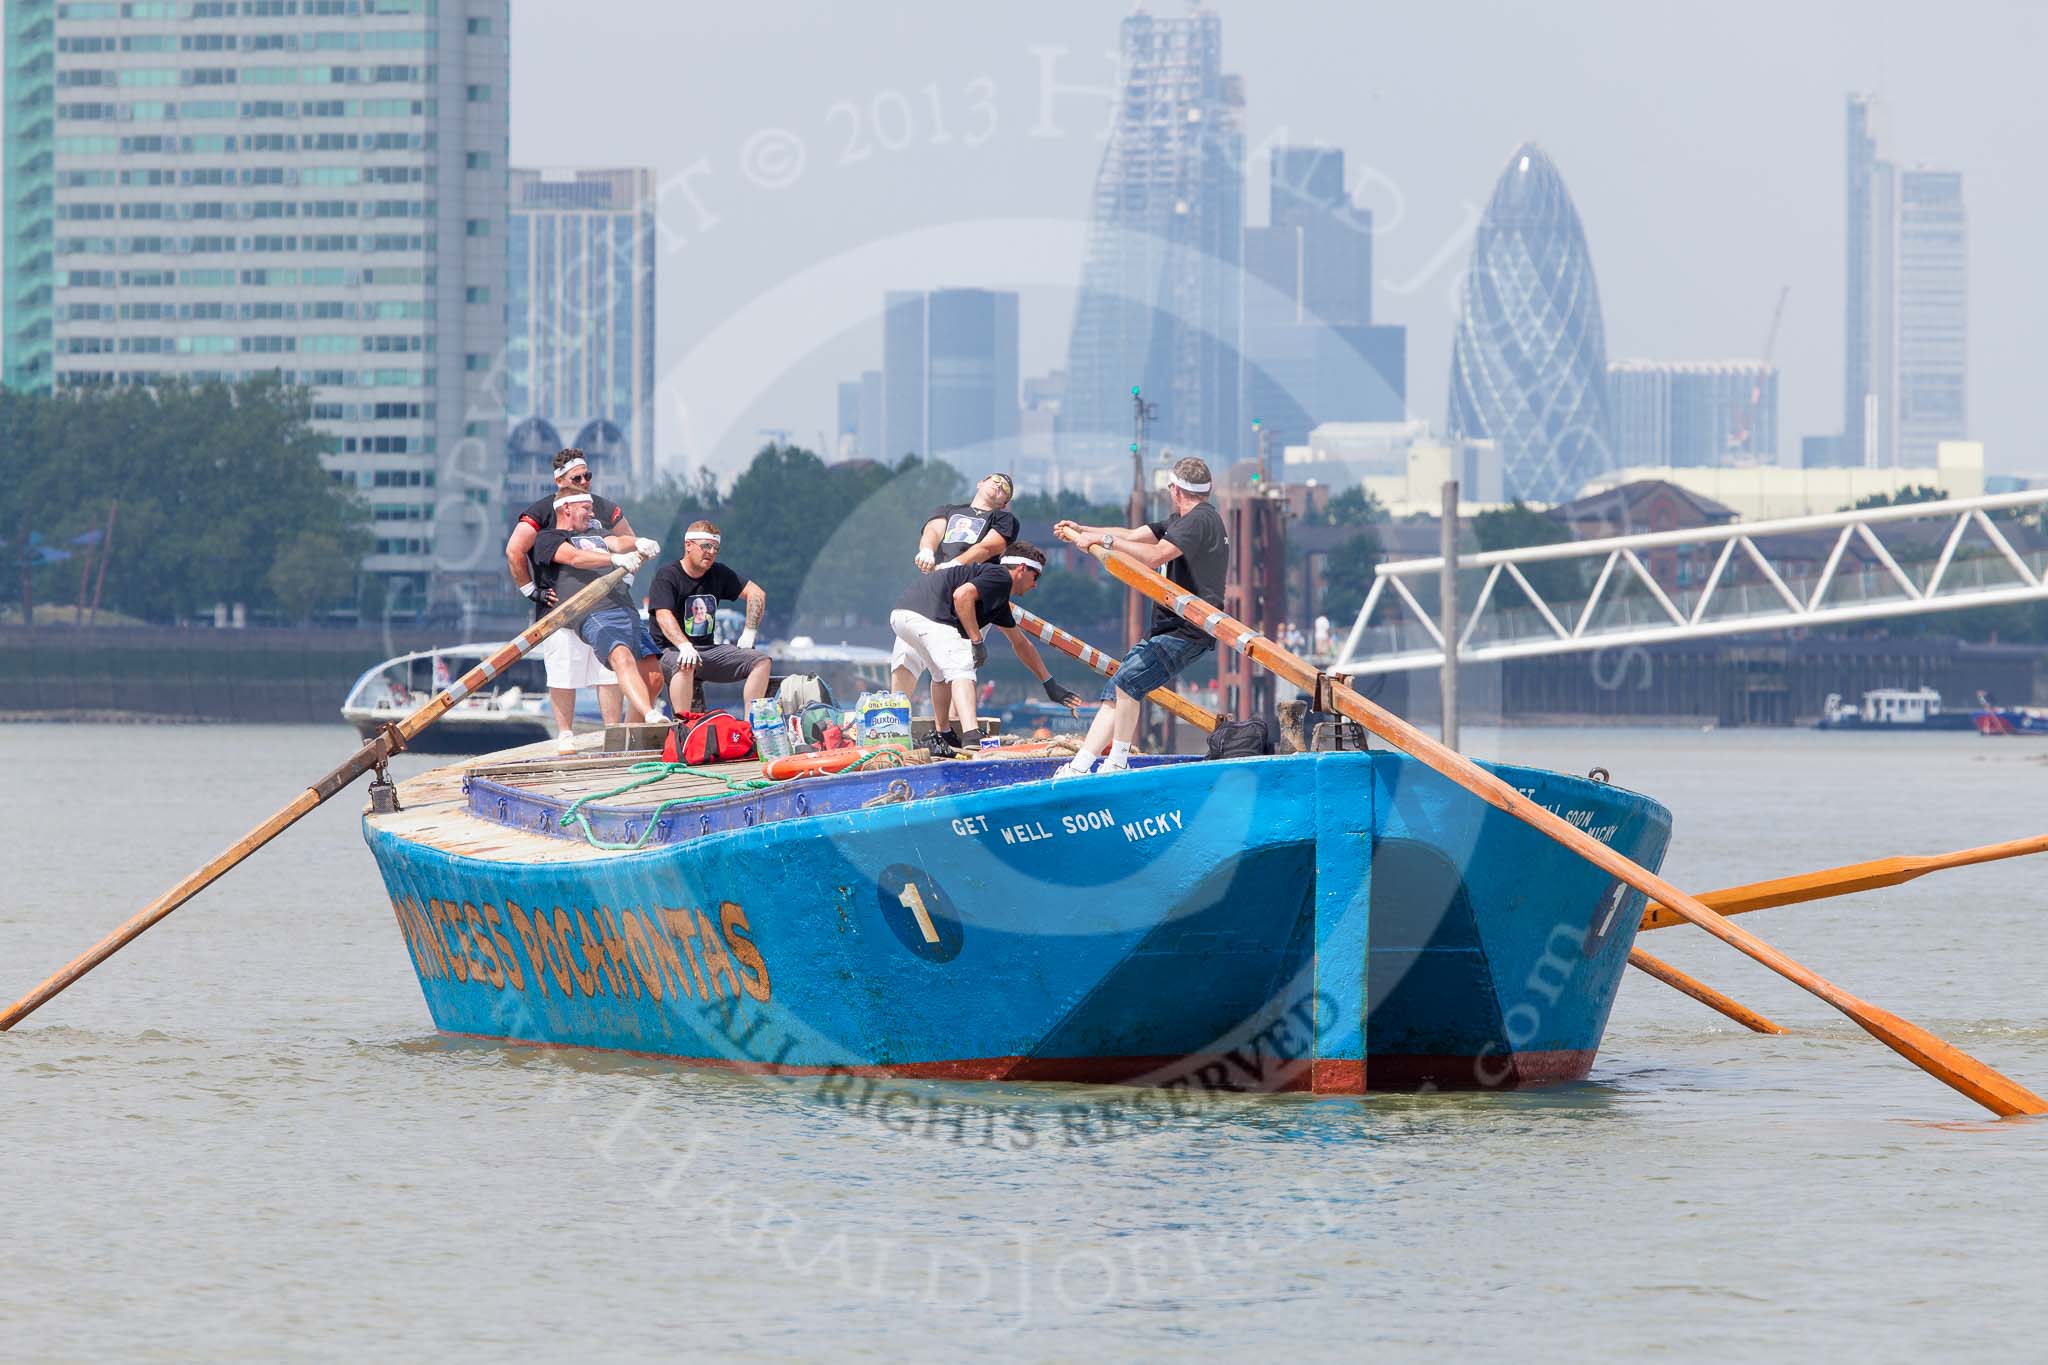 TOW River Thames Barge Driving Race 2013: Rear view of barge "Darren Lacey", by Princess Pocahontas, during the race, approaching Masthouse Terrace Pier. In the background the skyscrapers of the City of London, including the "Gherkin"..
River Thames between Greenwich and Westminster,
London,

United Kingdom,
on 13 July 2013 at 12:41, image #174